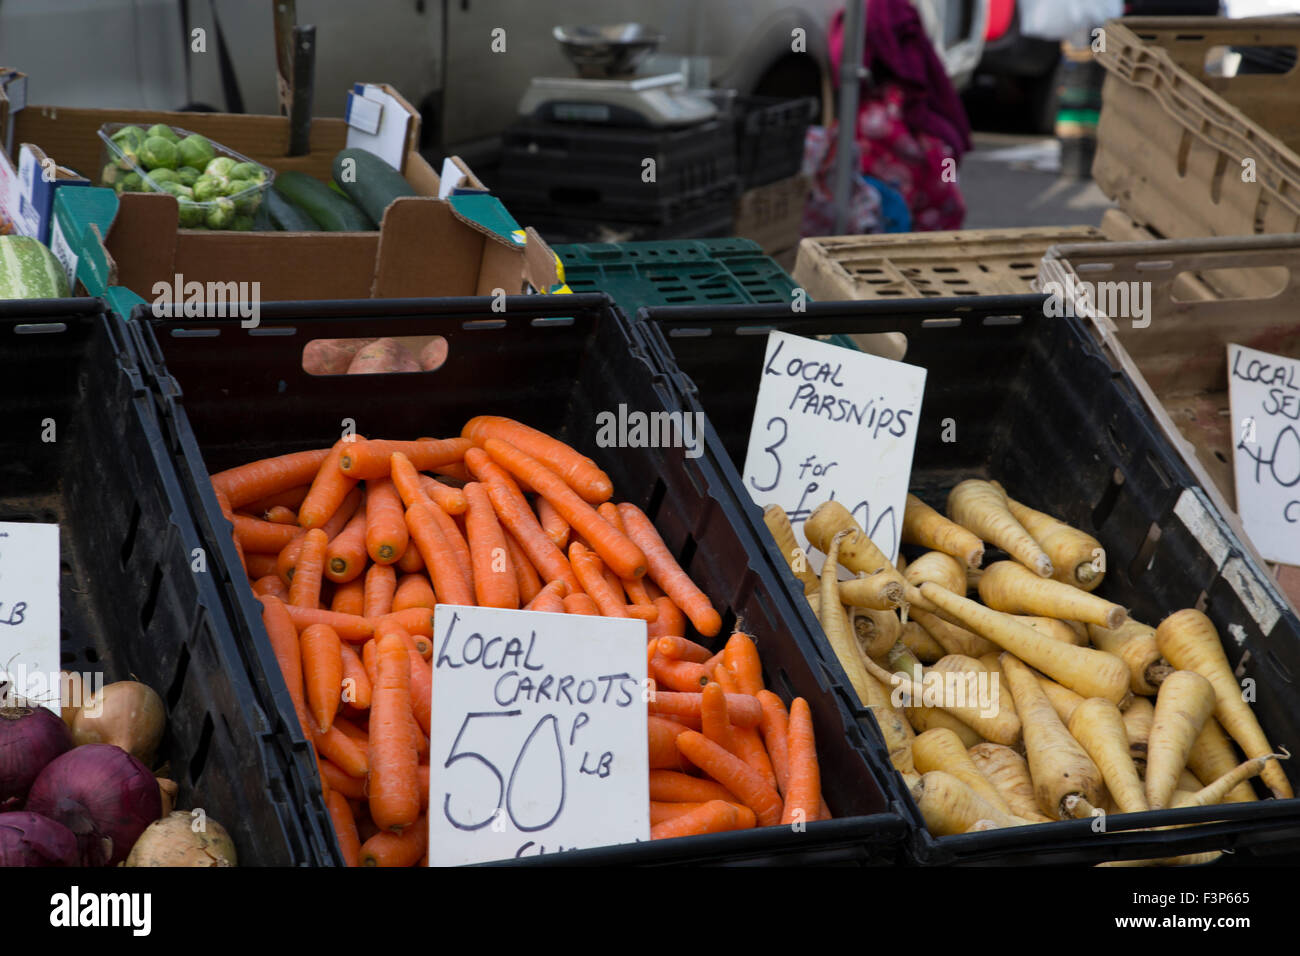 Local market stall selling vegetables Stock Photo